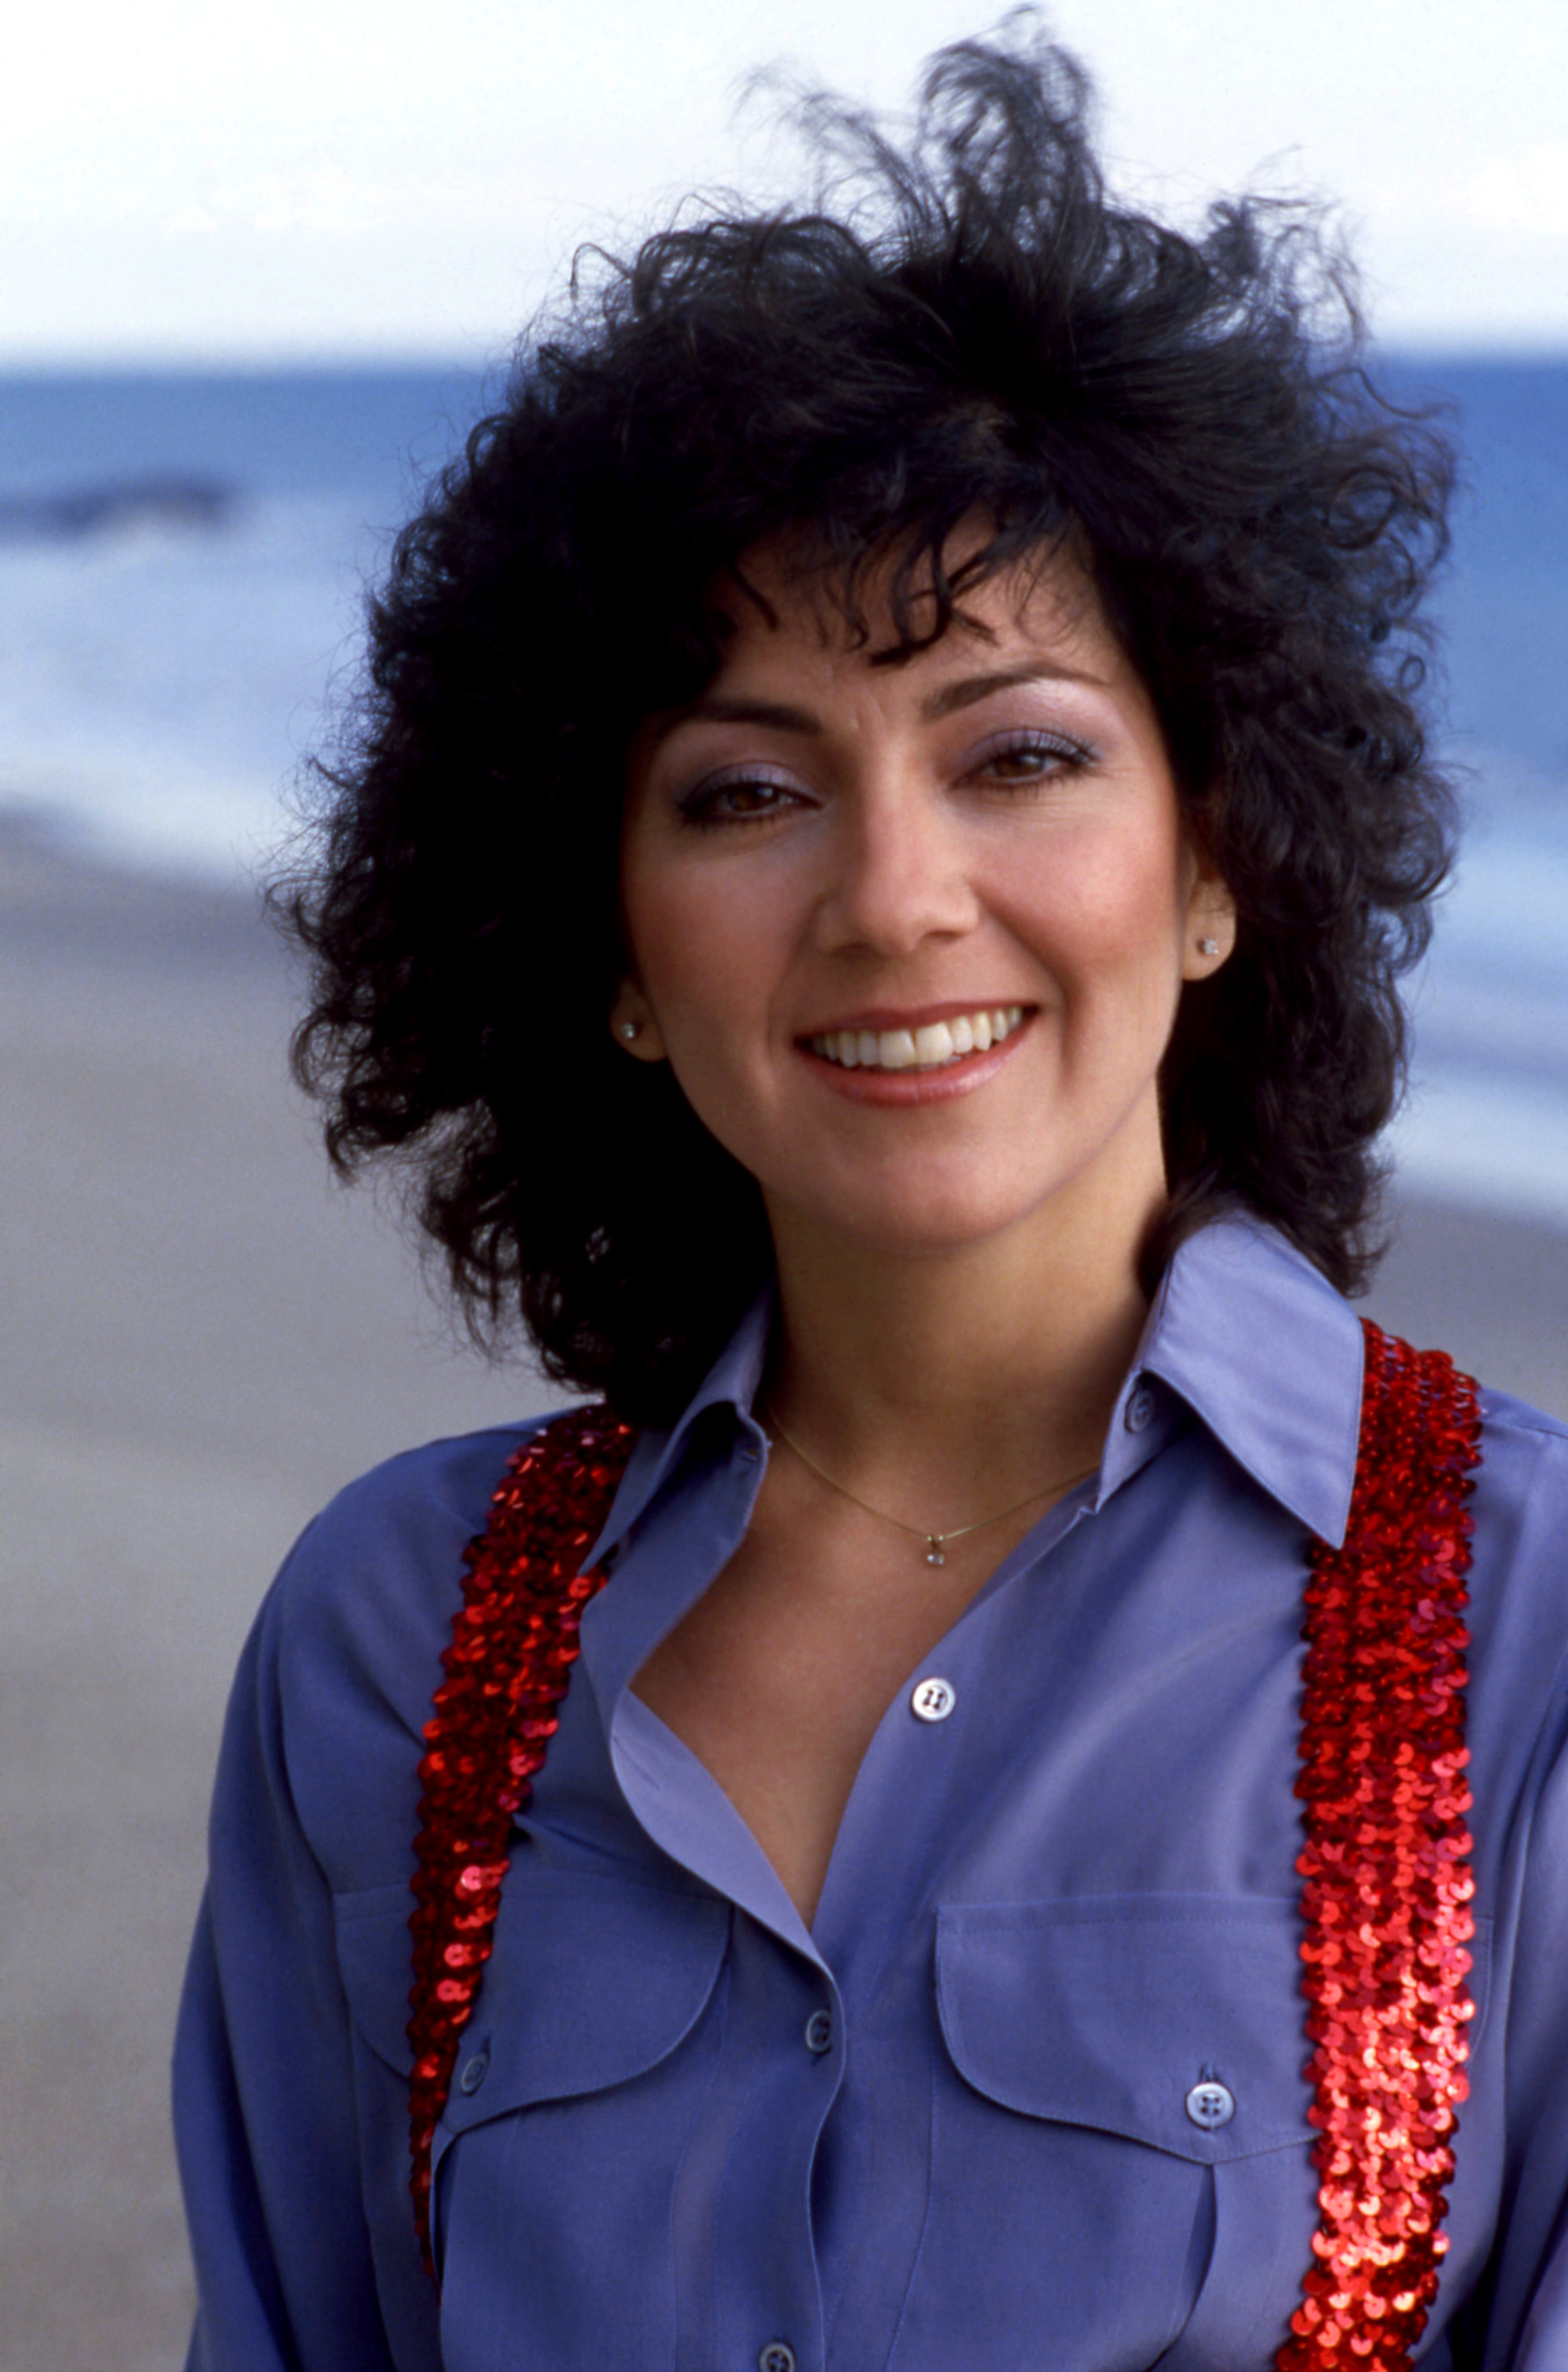 Comedian Joyce DeWitt poses for a portrait at the beach on January 1, 1980 in Los Angeles, California | Source: Getty Images